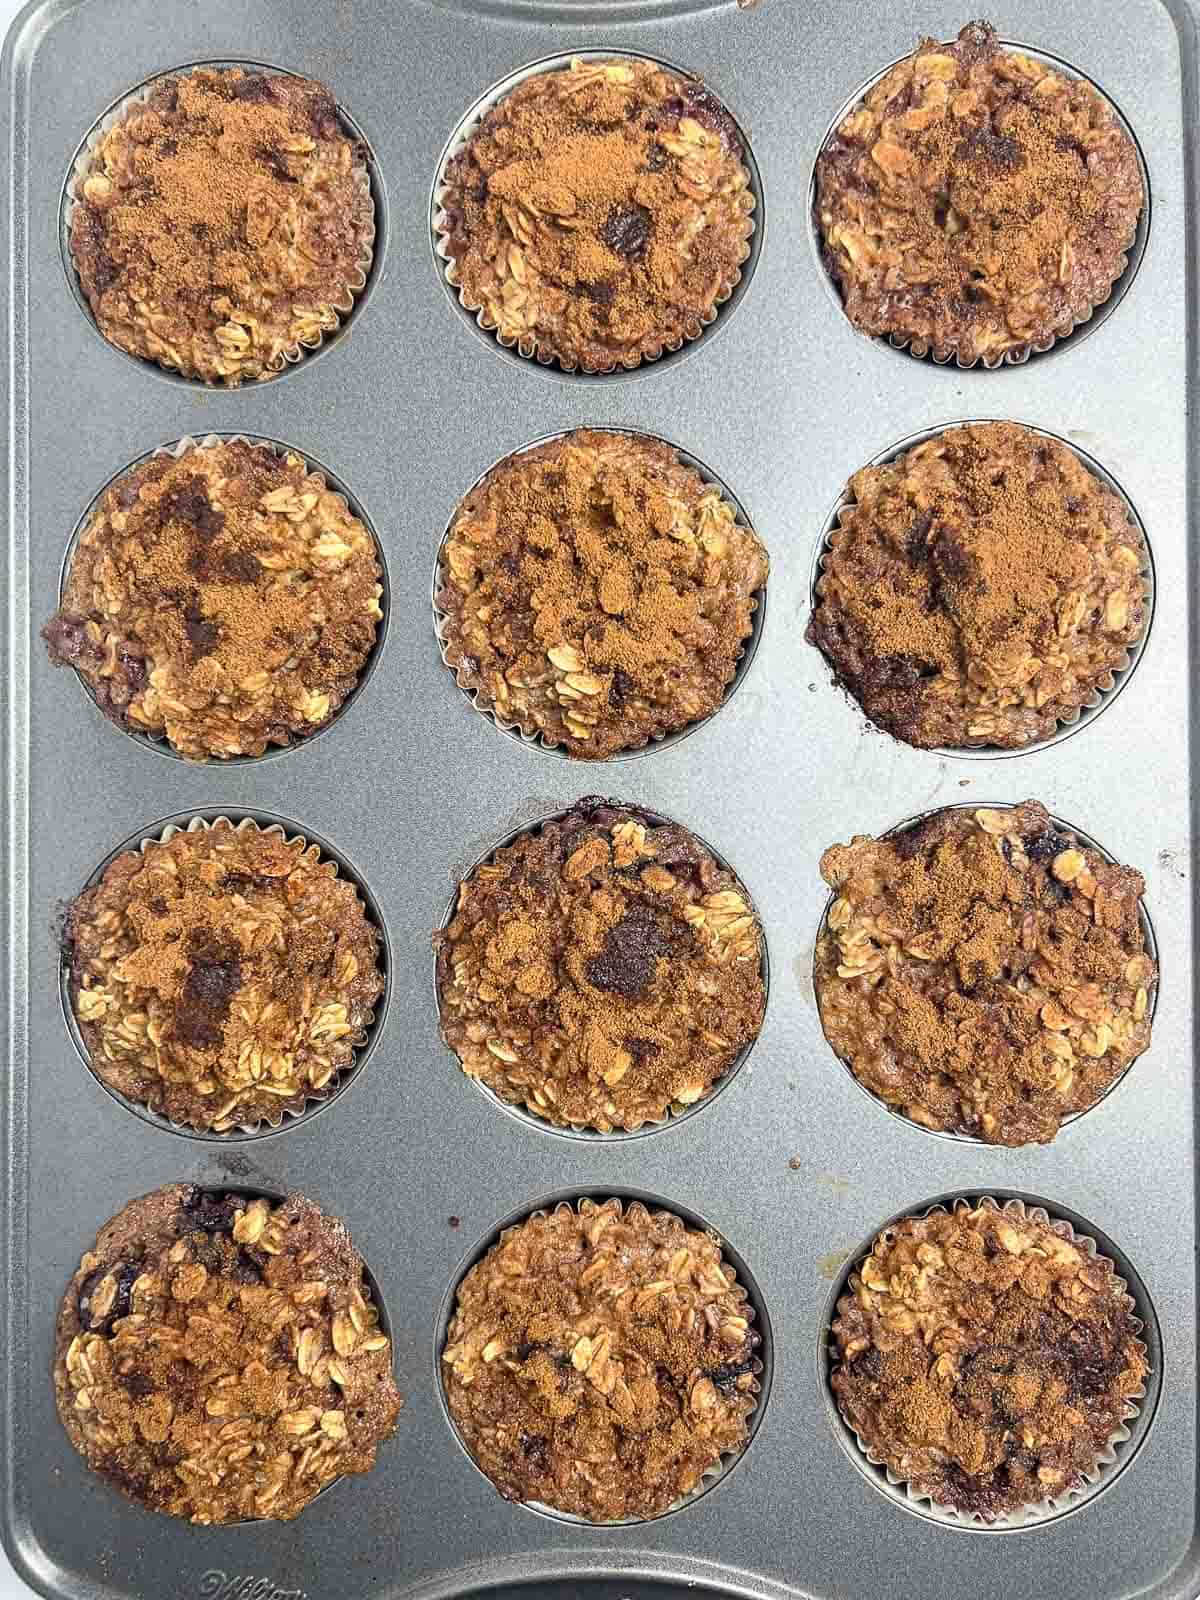 Cherry baked oatmeal cups fresh out of the oven in a muffin tin.